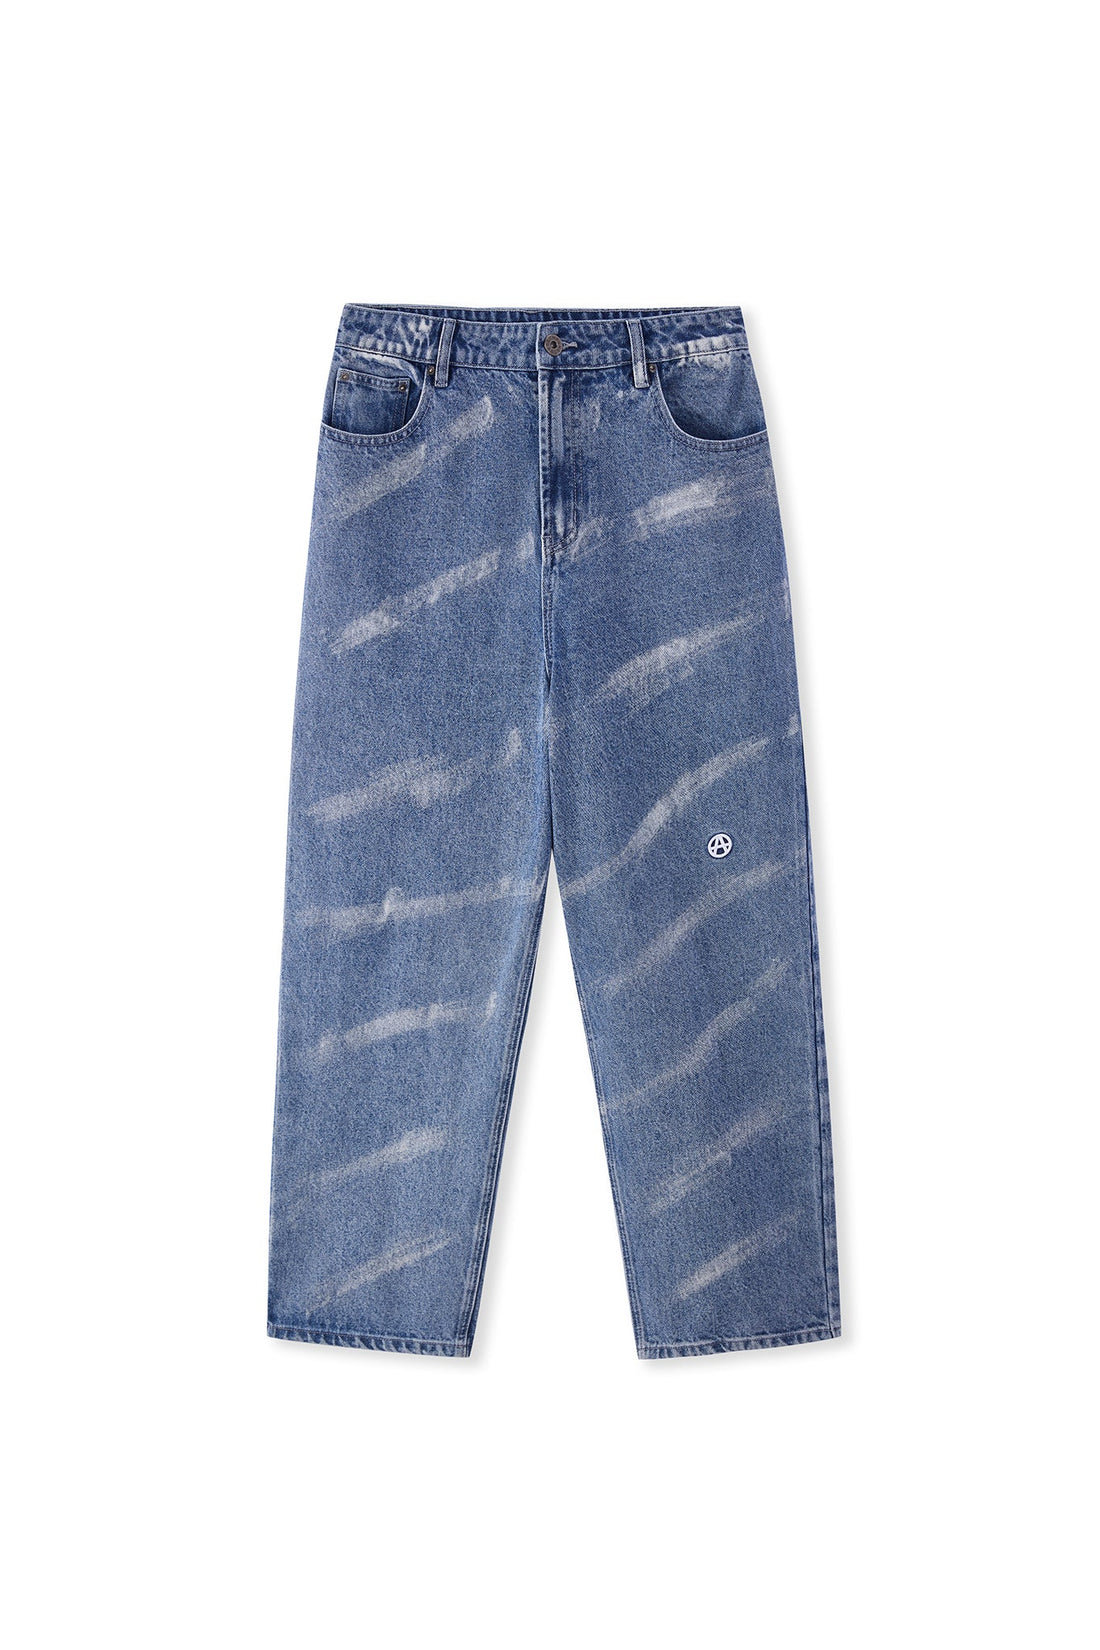 RIPPLE JEANS BLUE Acupuncture